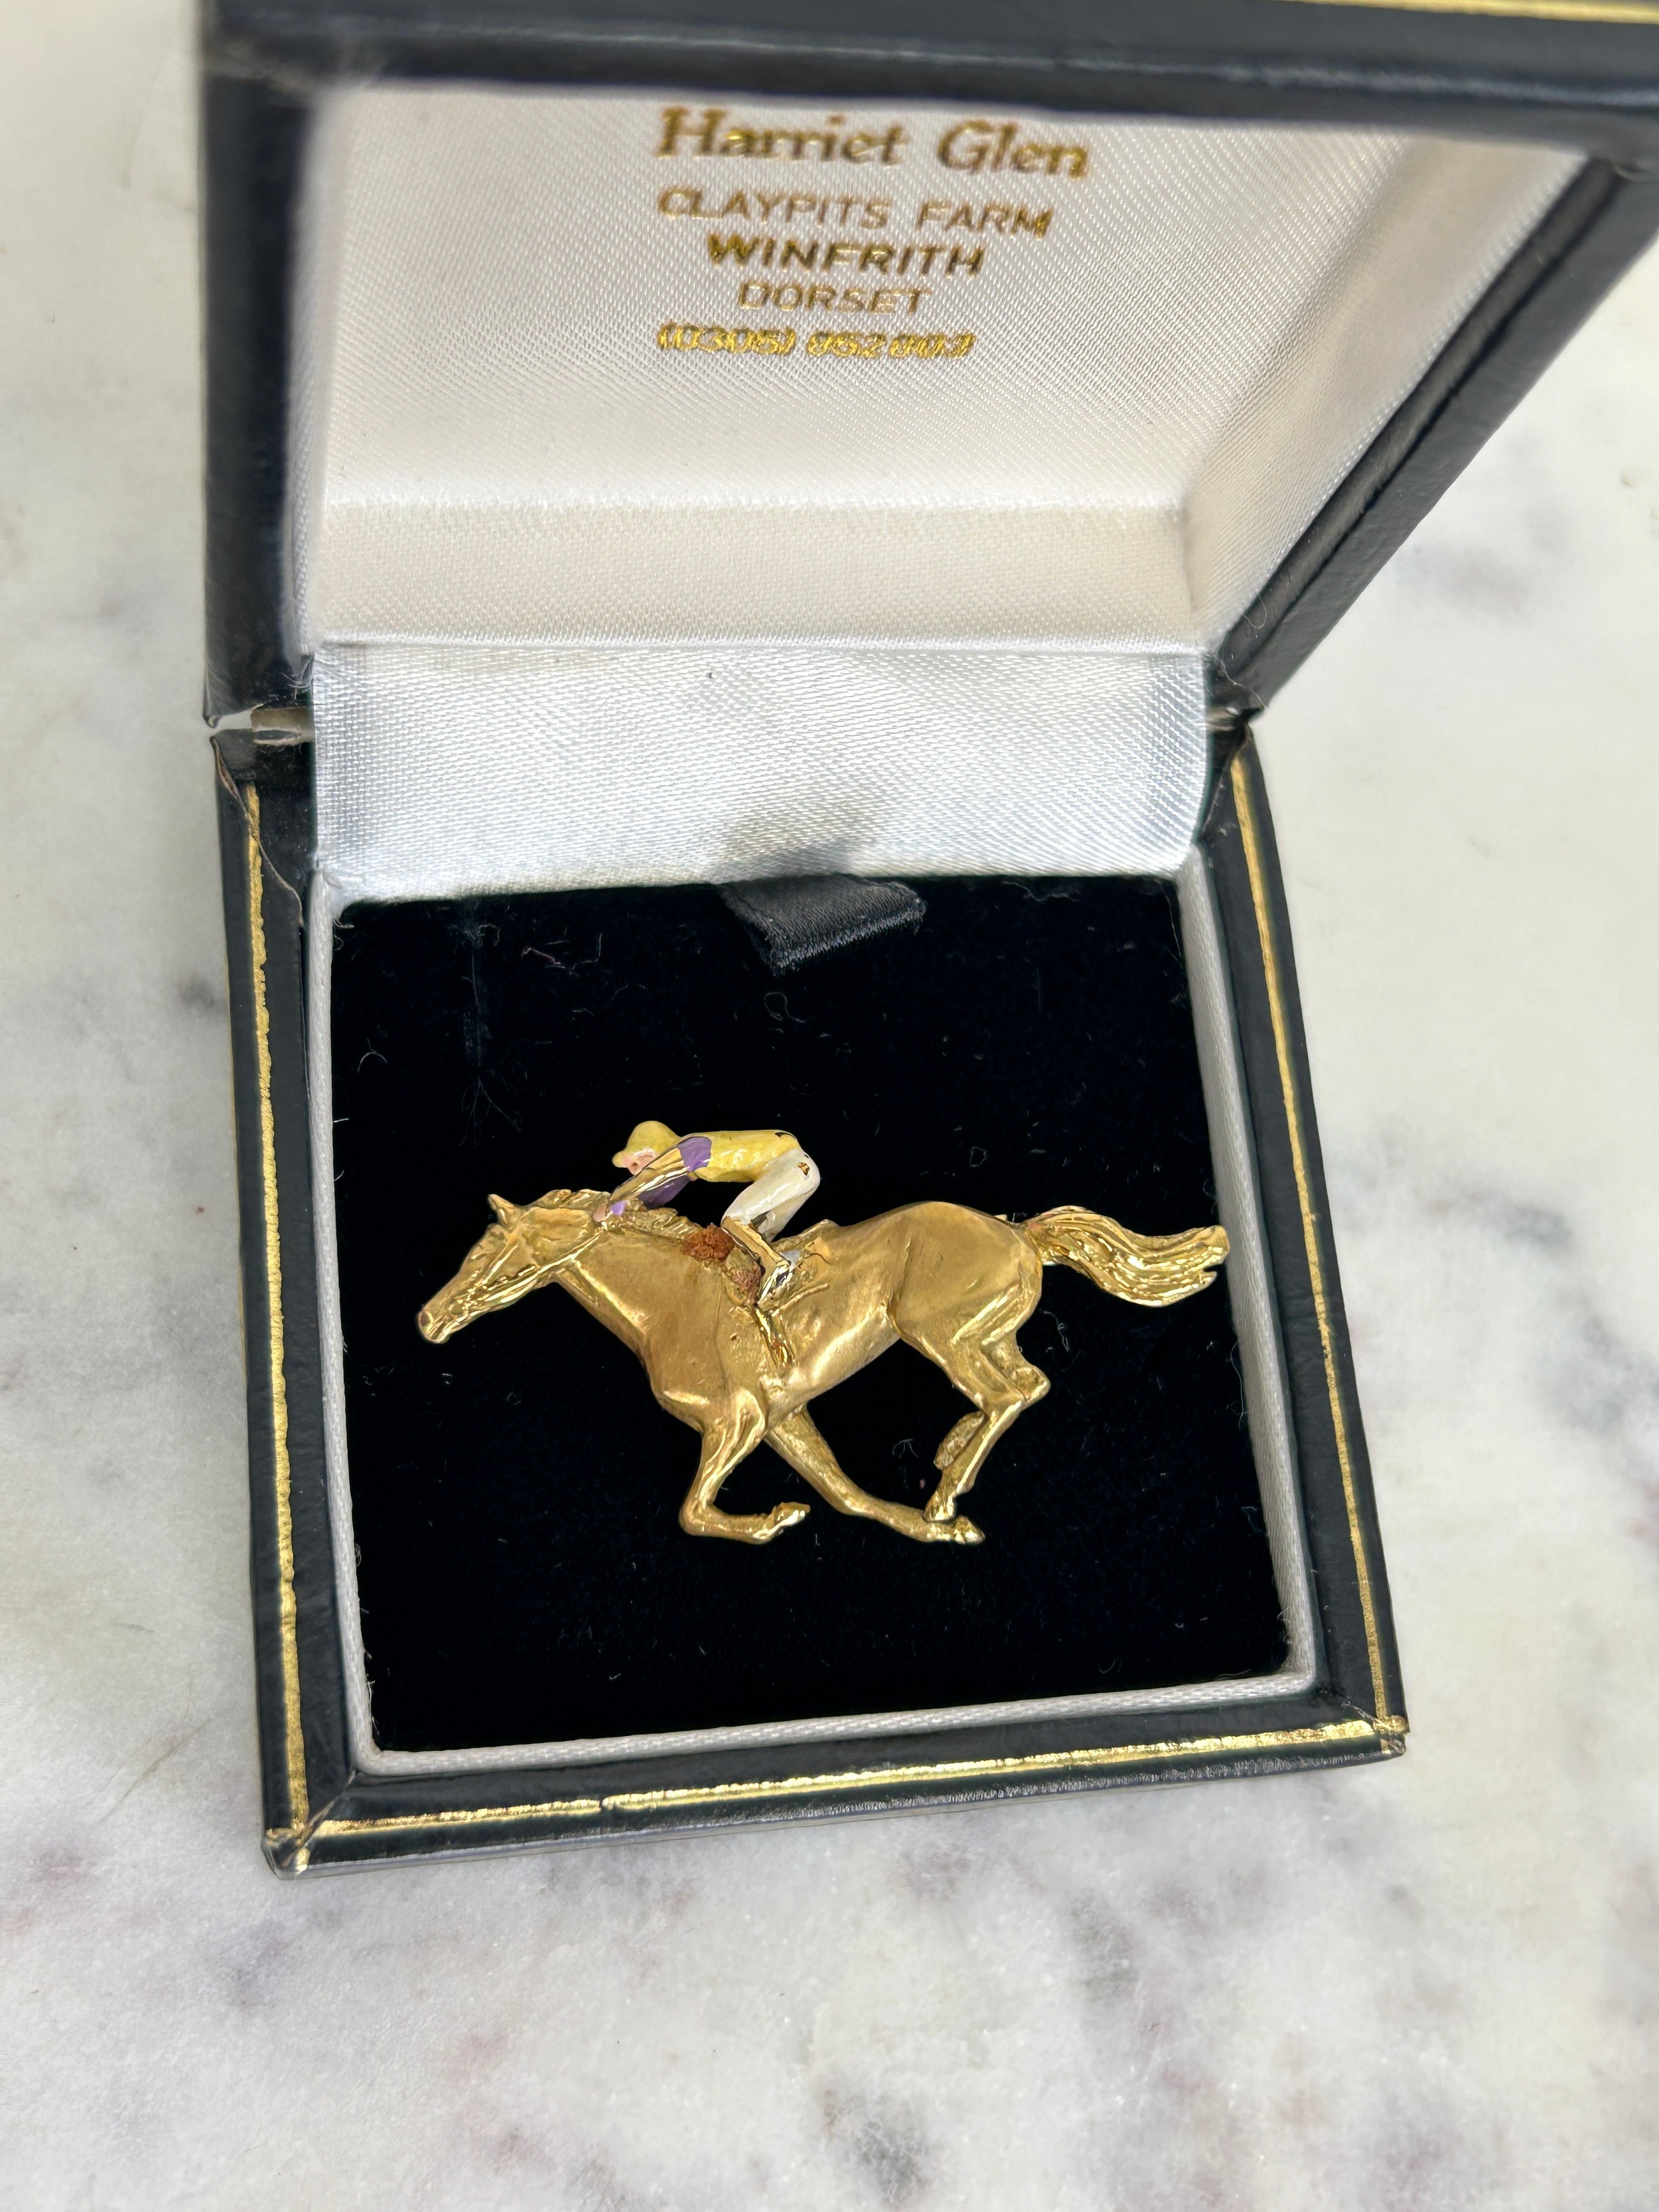 AN 18CT GOLD HORSE PIN RACING BROOCH WITH ENAMEL JOCKEY BY HARRIET GLEN, 10.5gms - Image 2 of 3